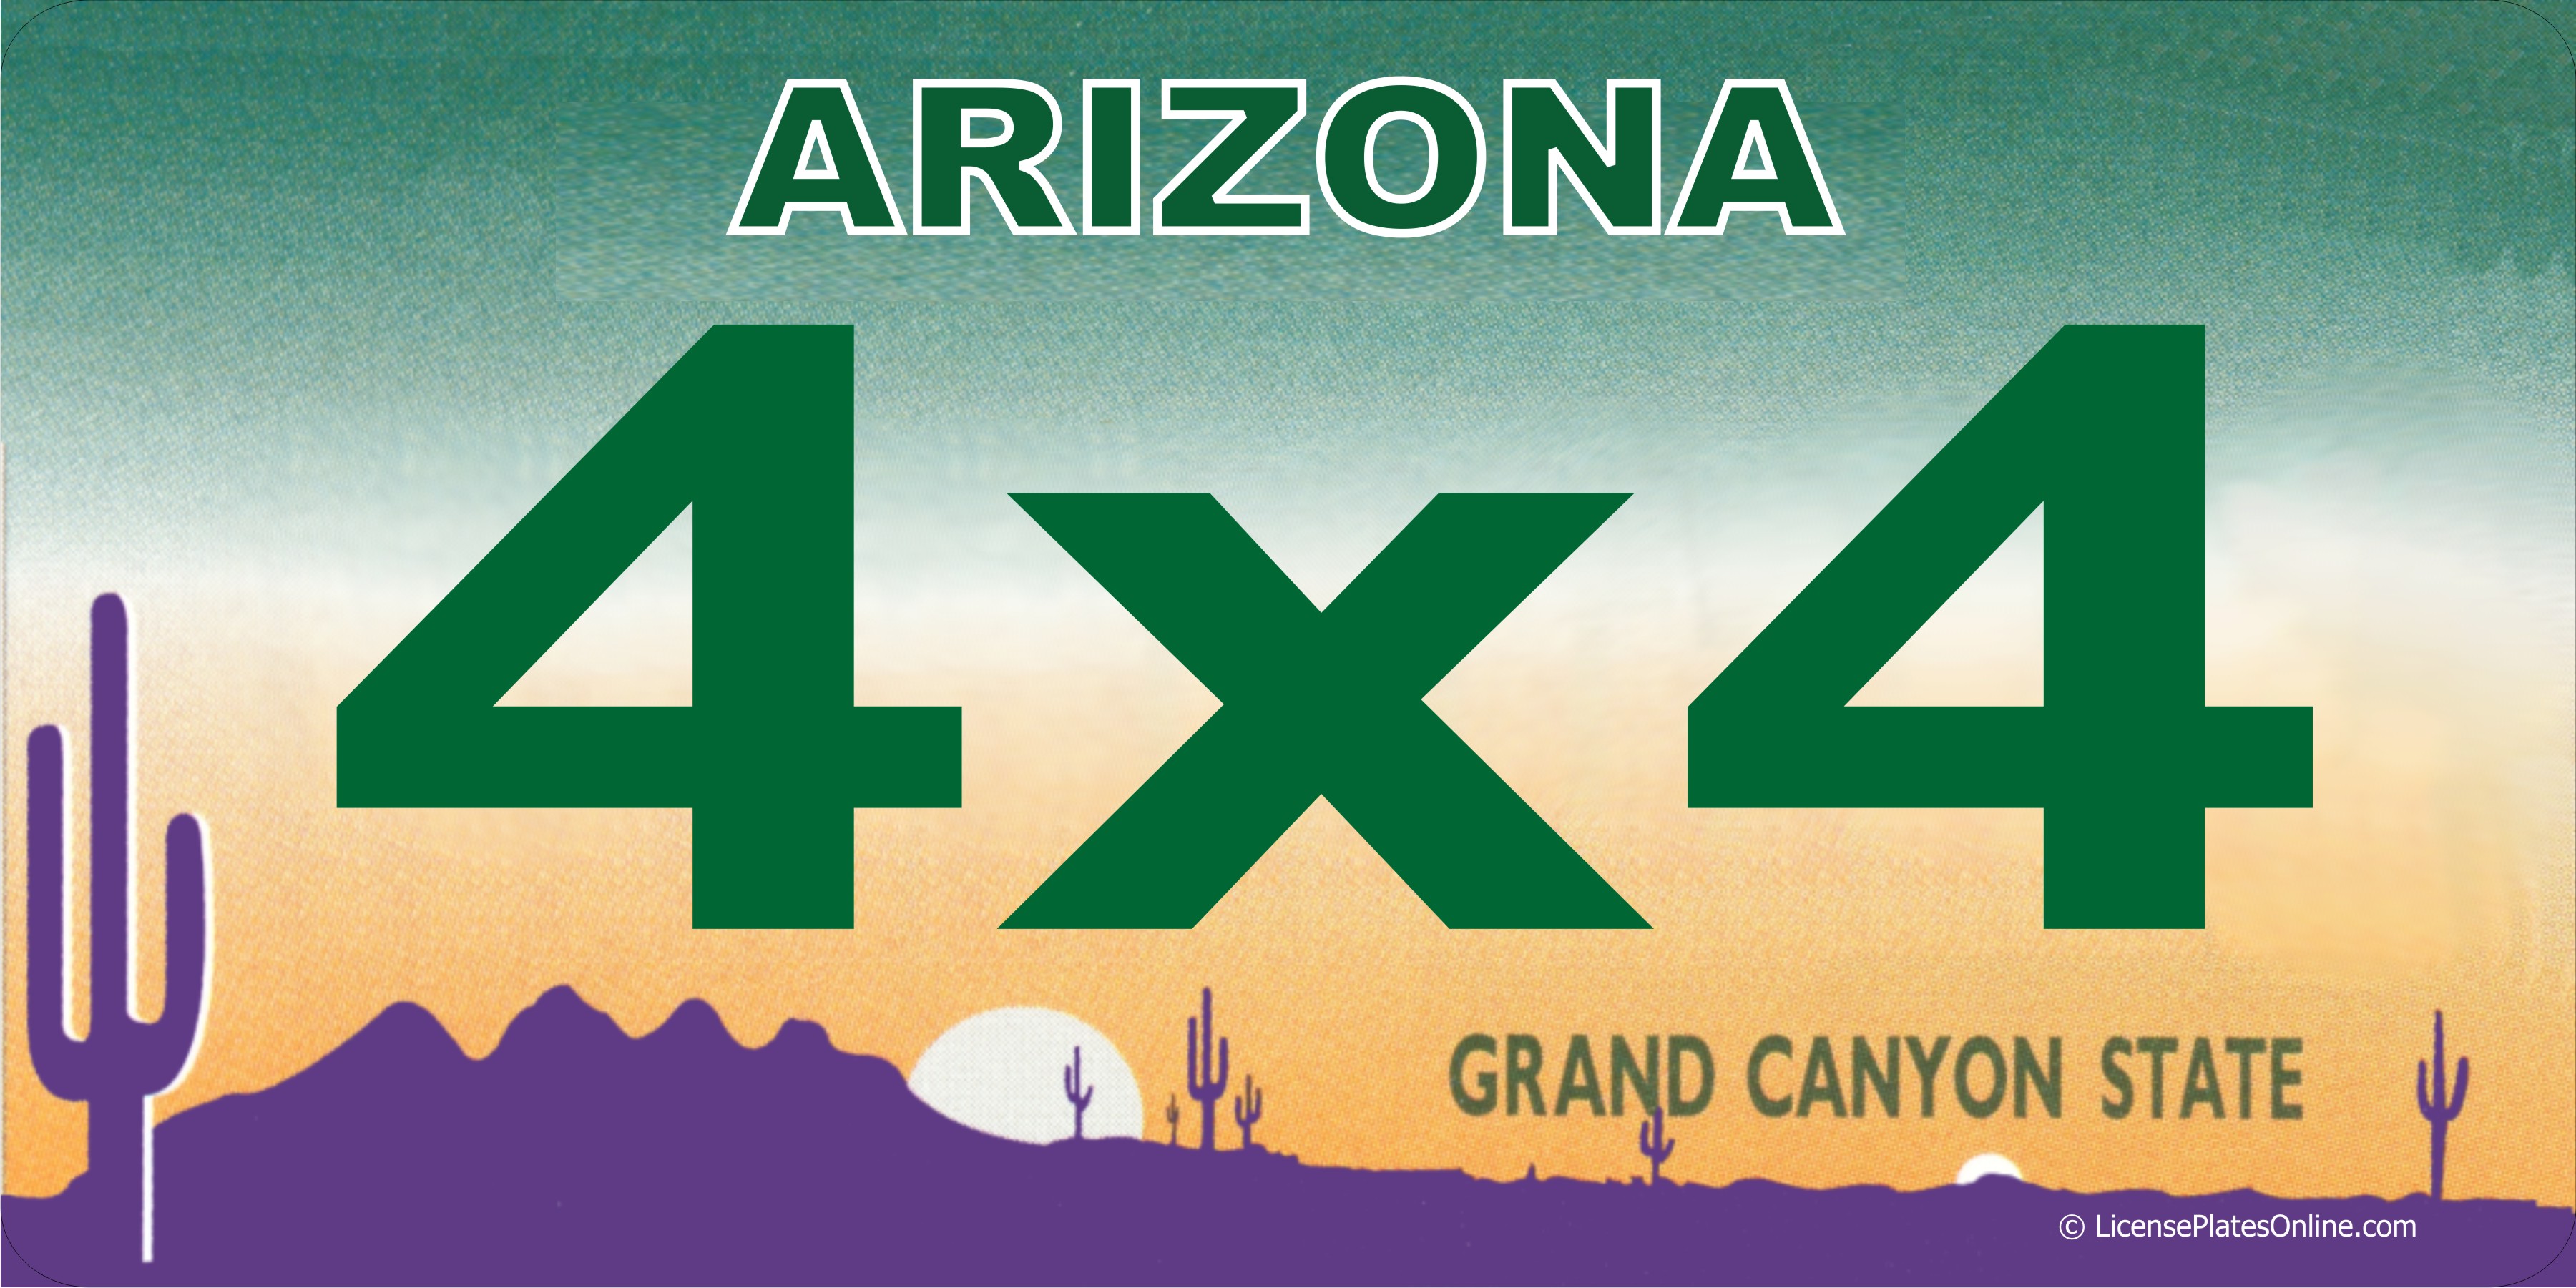 Arizona 4x4 Photo LICENSE PLATE  Free Personalization on this PLATE